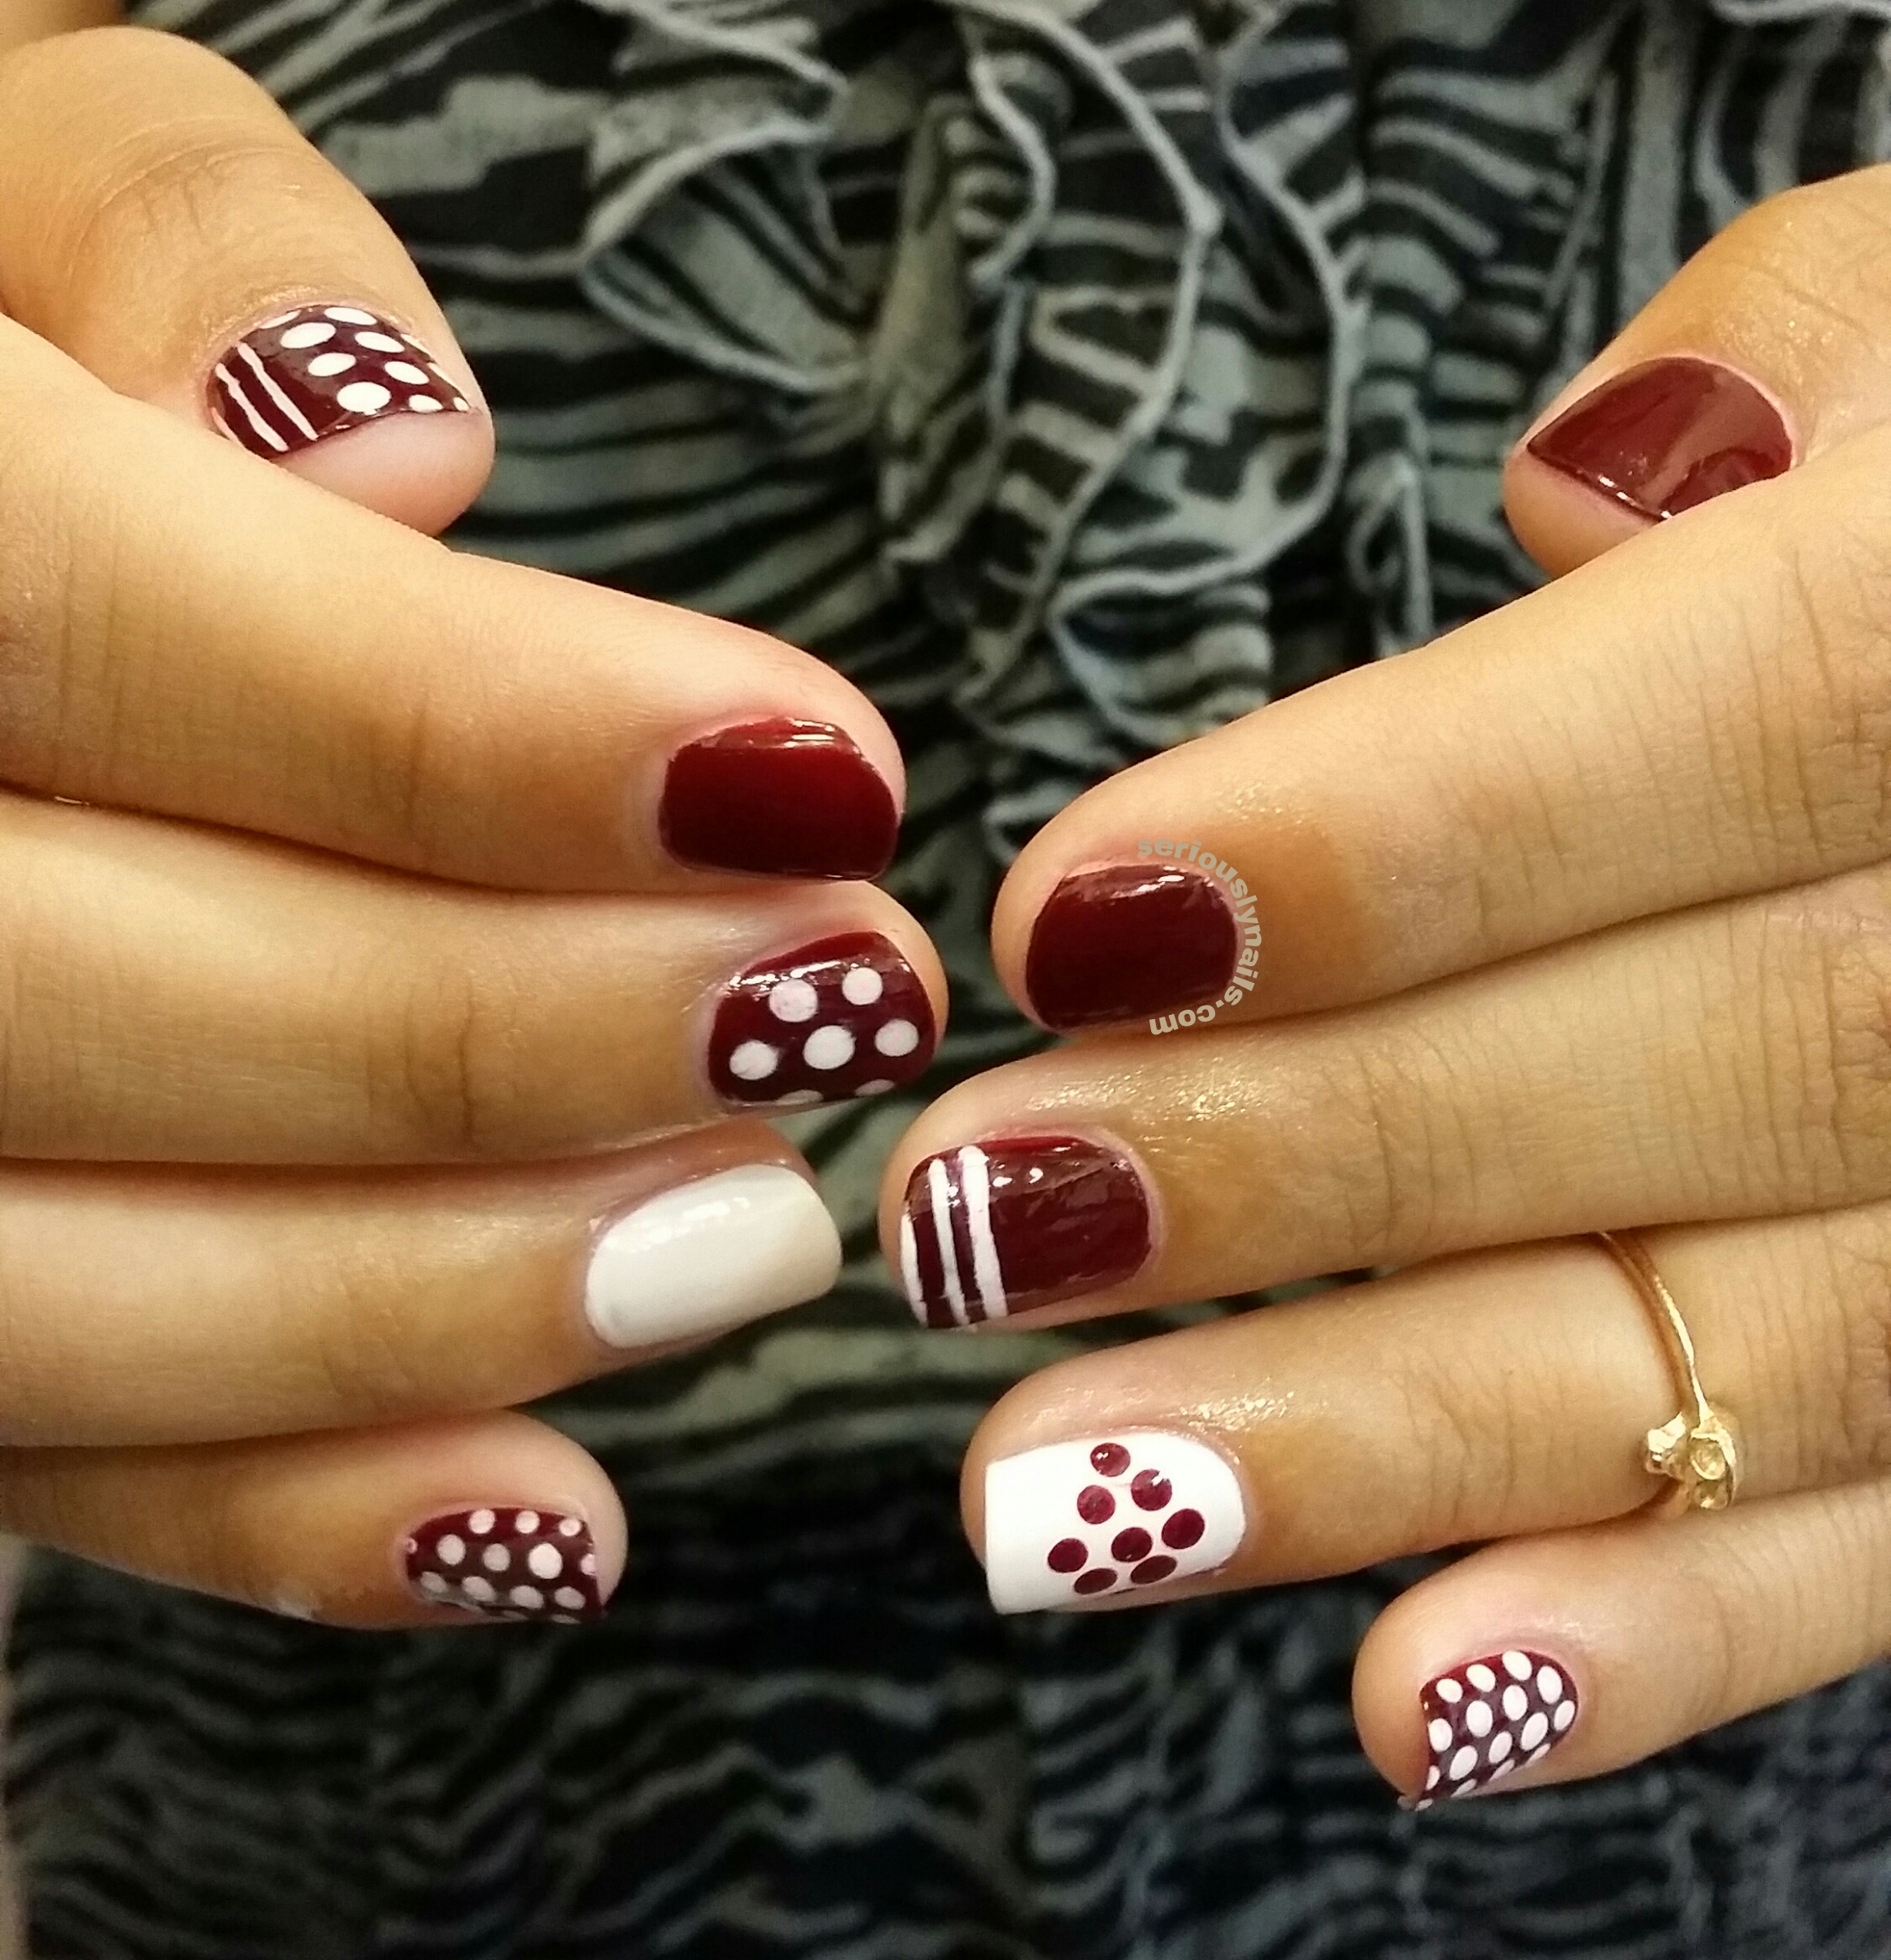 Wednesday’s Cute Nail Art. | Seriously Nails